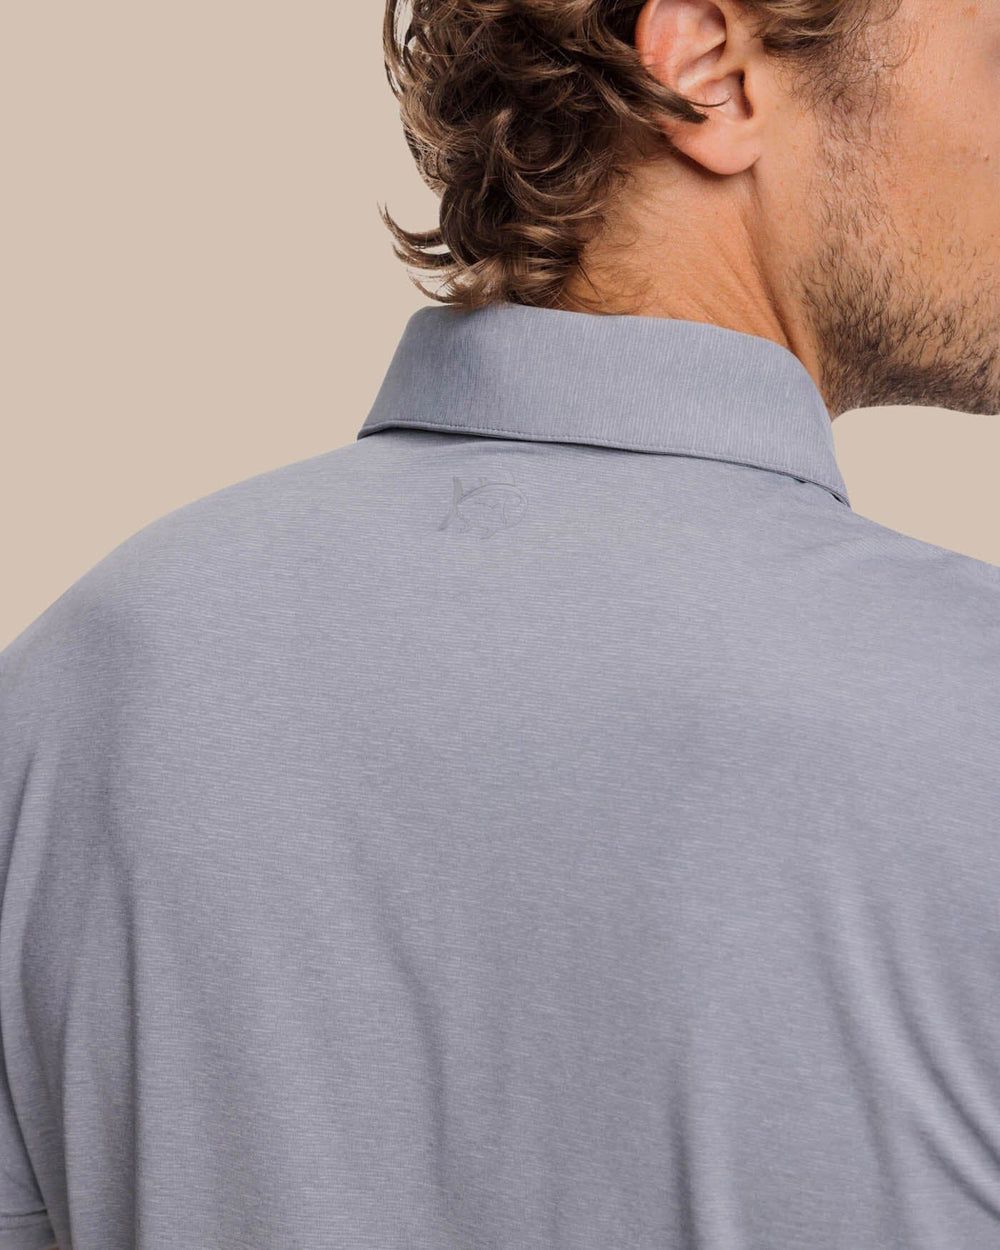 The yoke view of the brrr°®-eeze Heather Performance Polo Shirt by Southern Tide - Heather Steel Grey